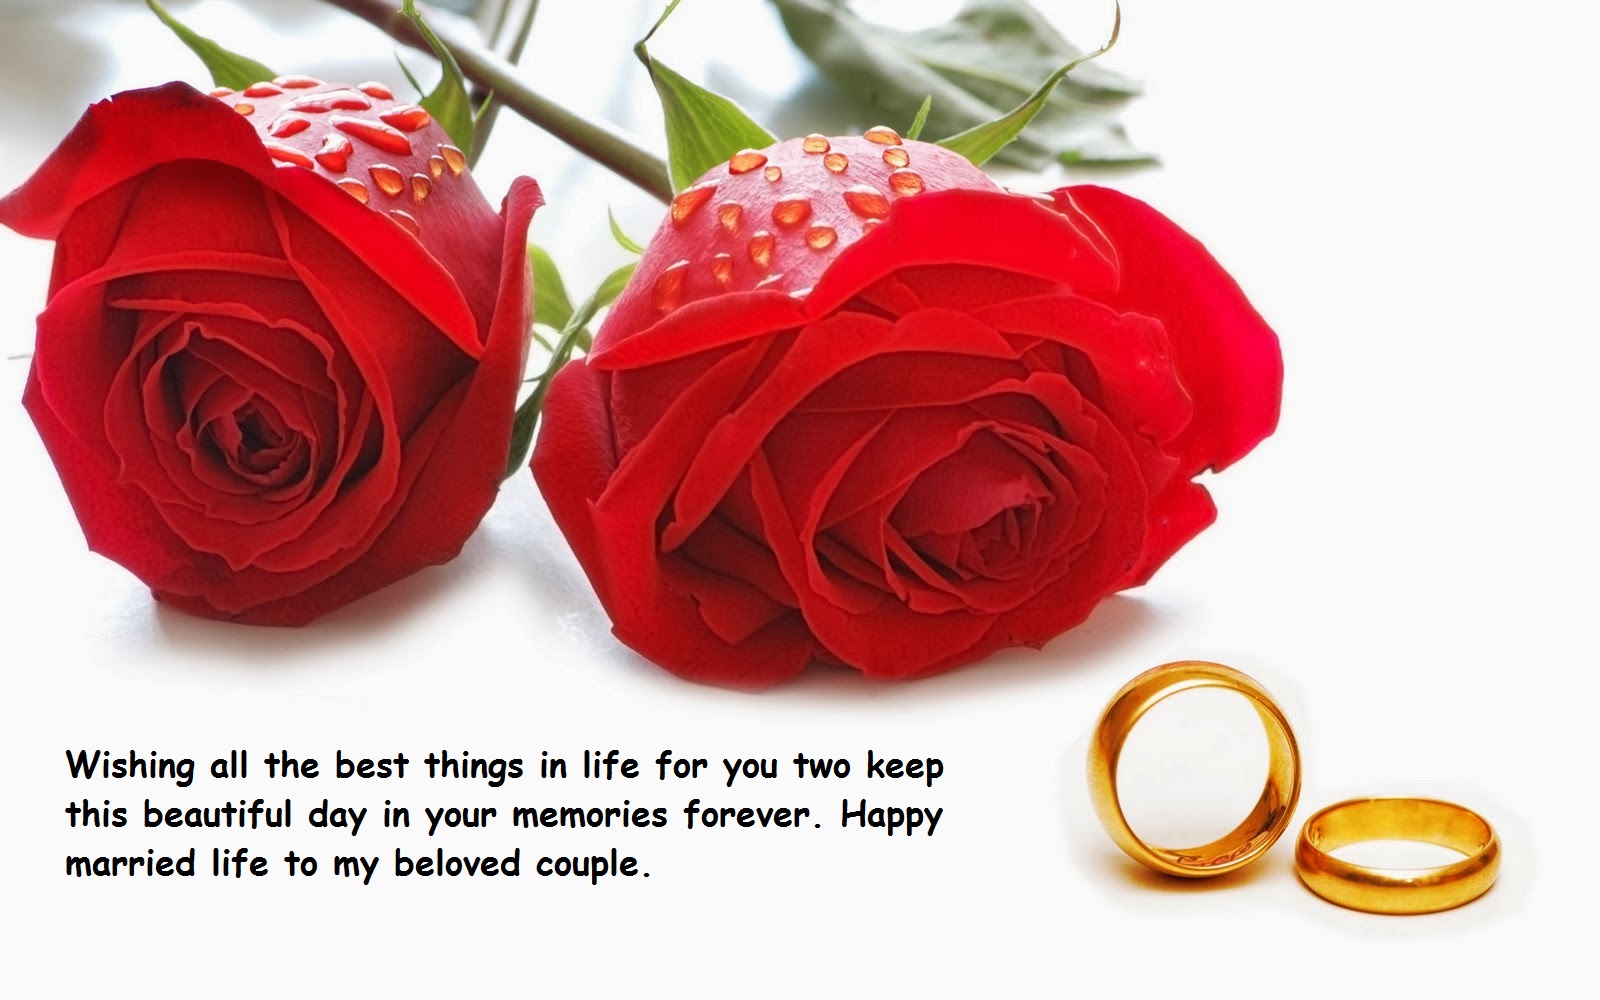 Happy Married Life Greeting Cards Quotes | Best Wishes